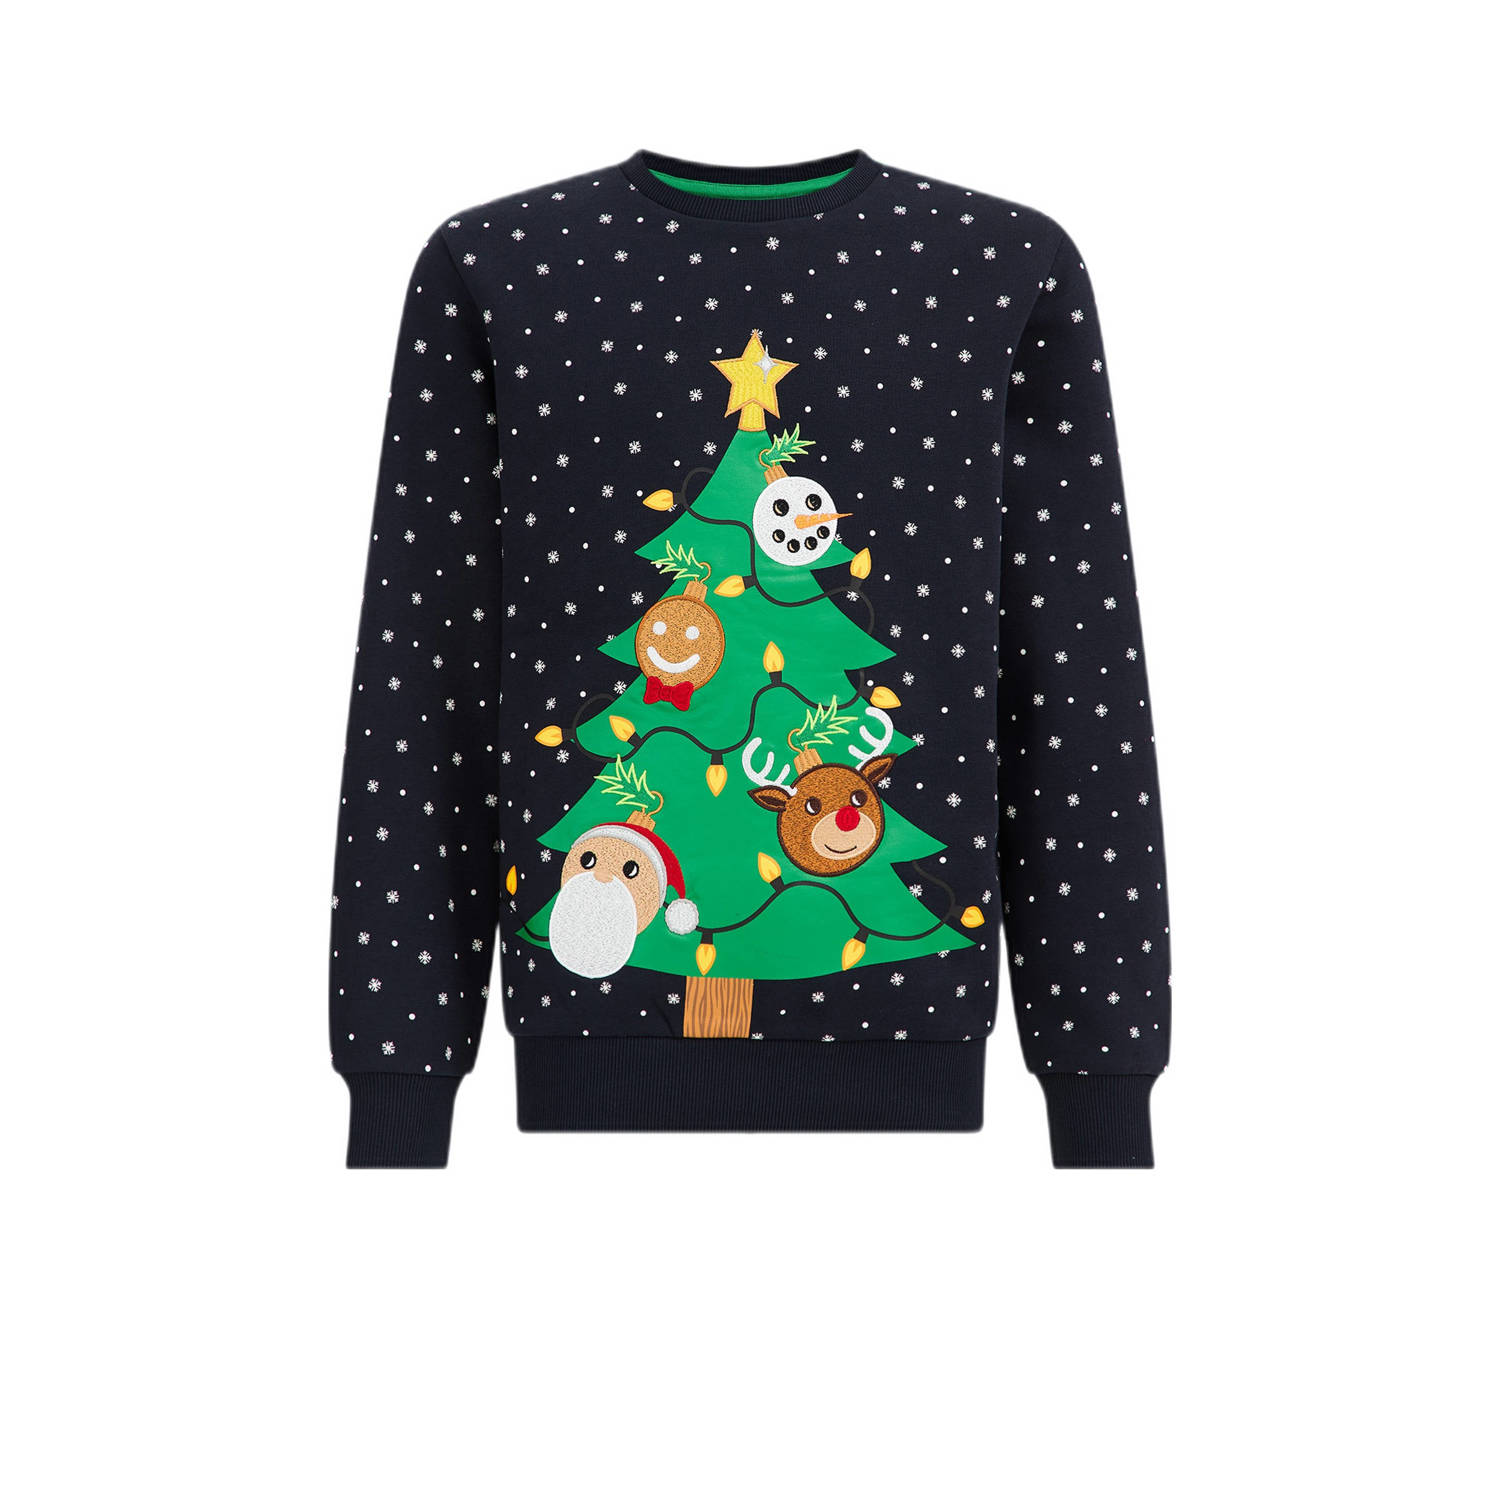 WE Fashion kerstsweater met all over print donkerblauw groen All over print 110 116